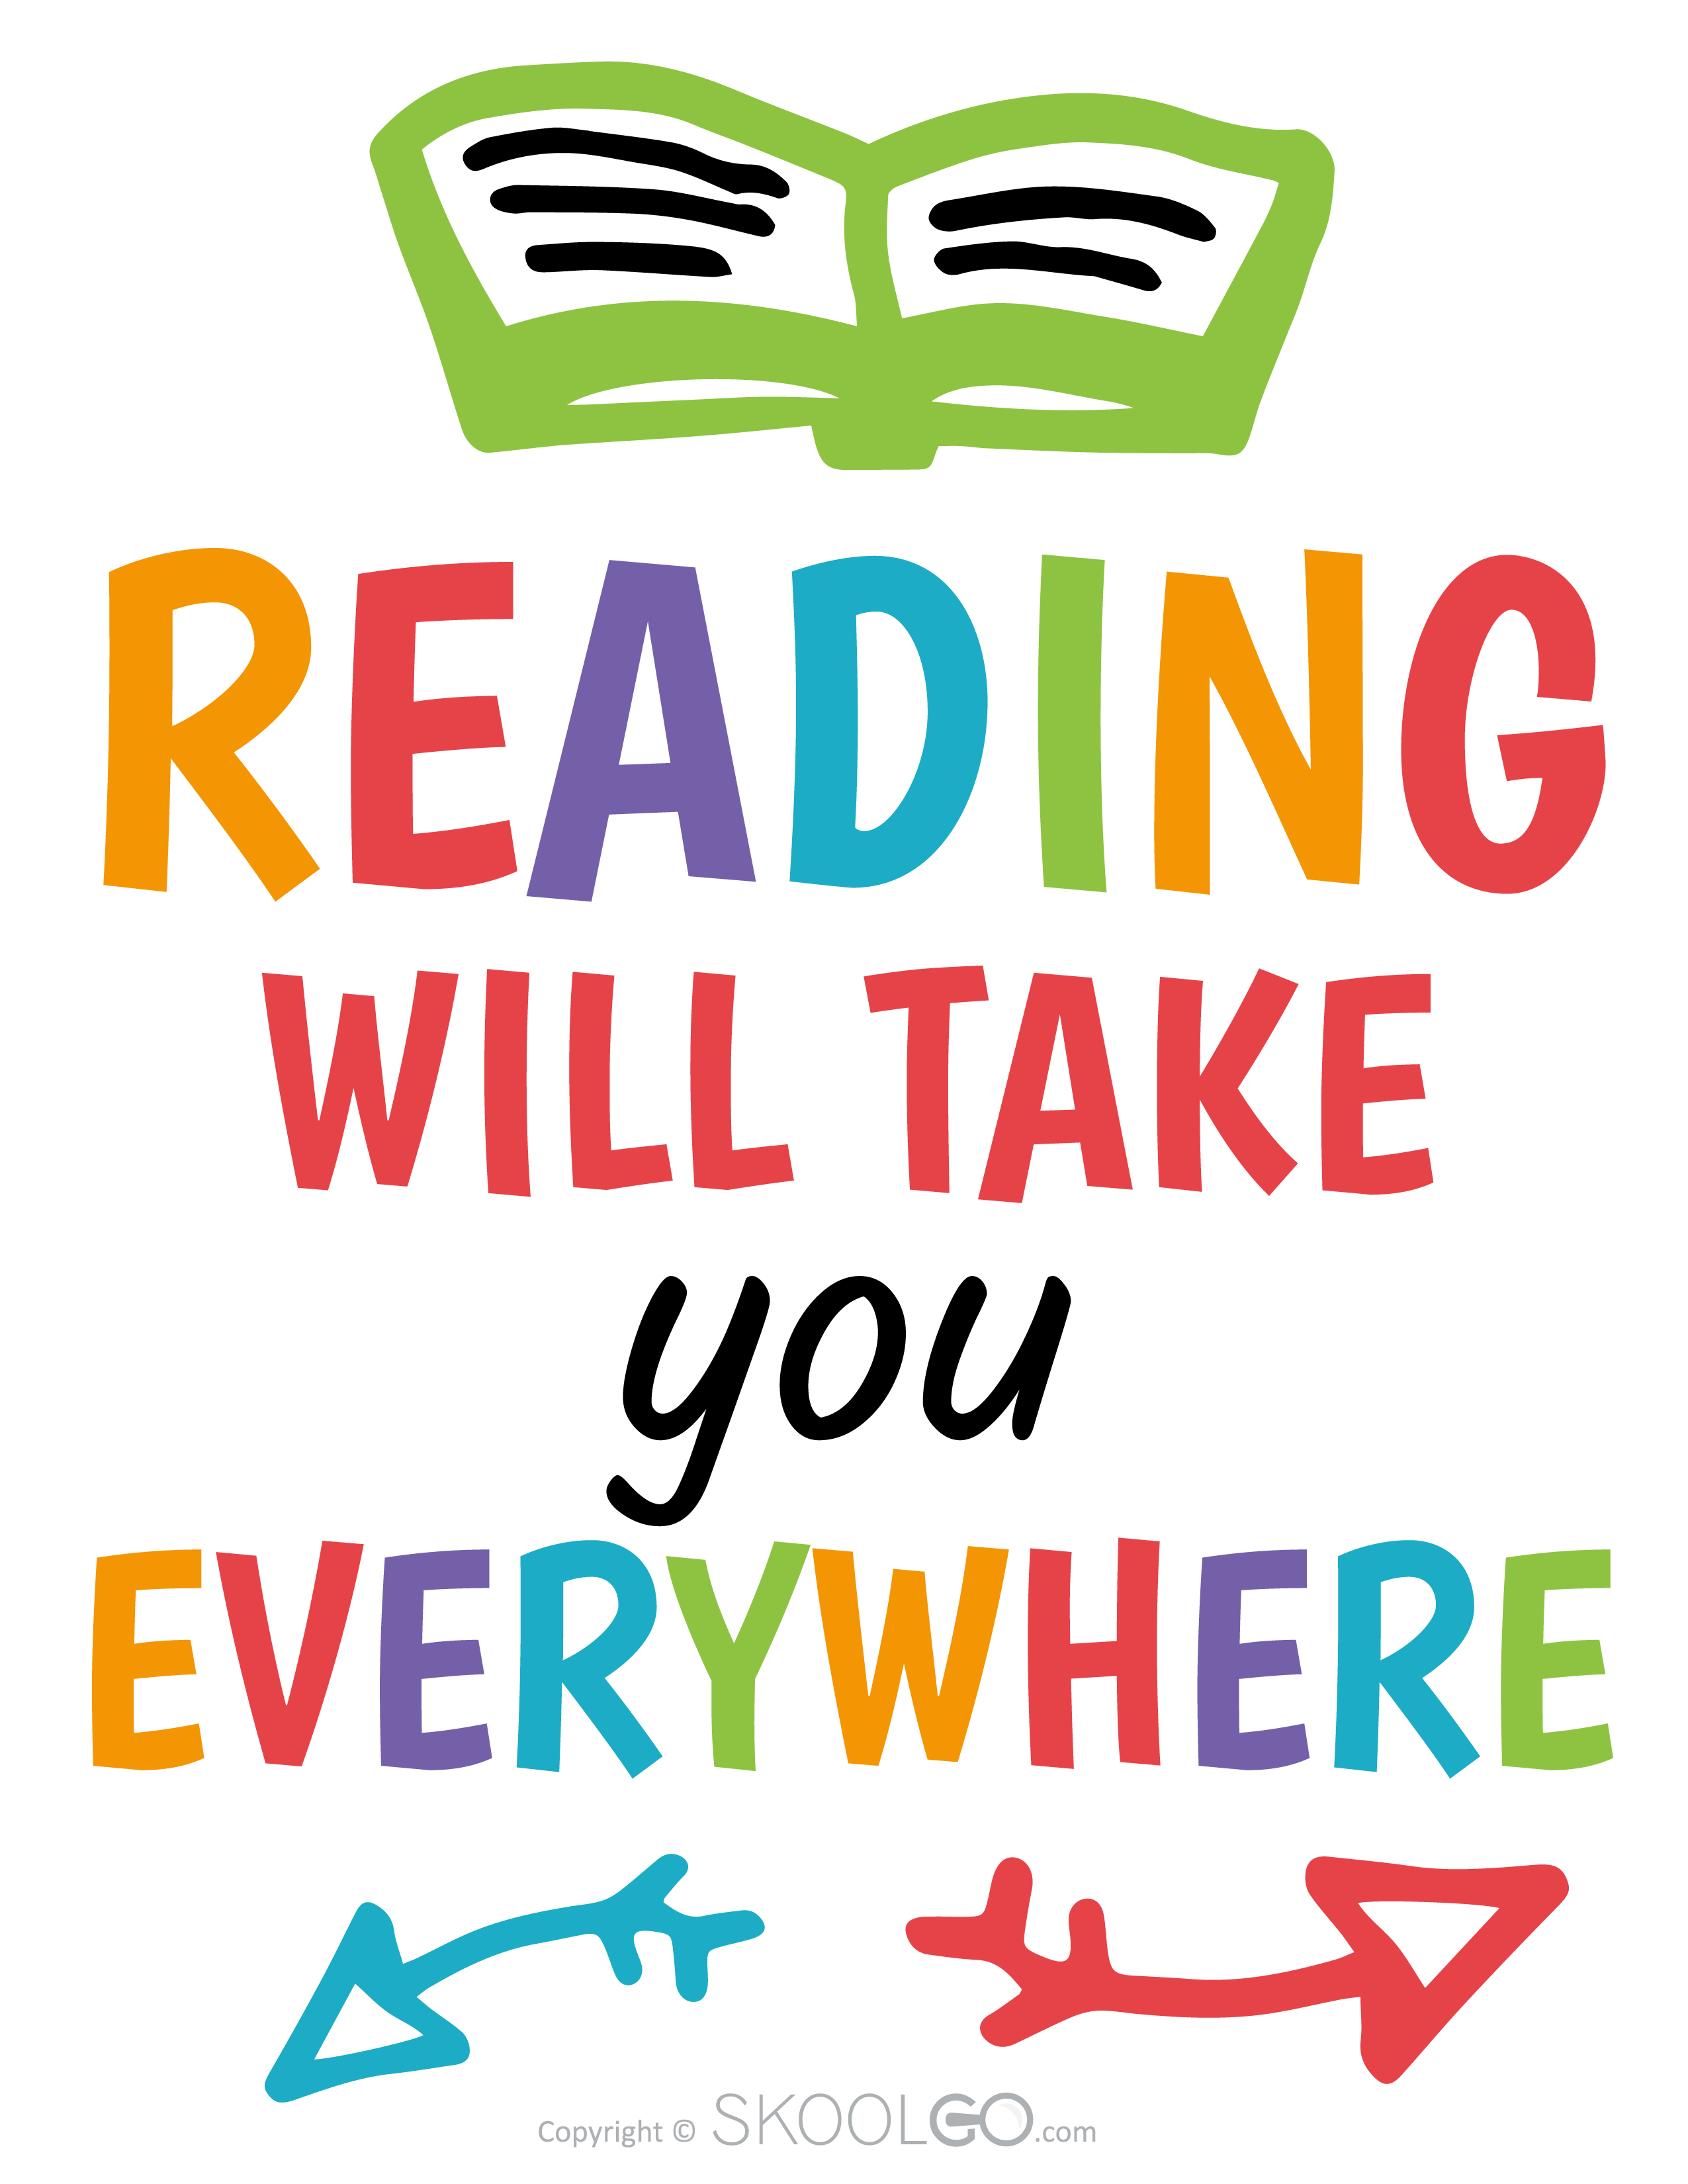 Reading Will Take You Everywhere - Free Poster